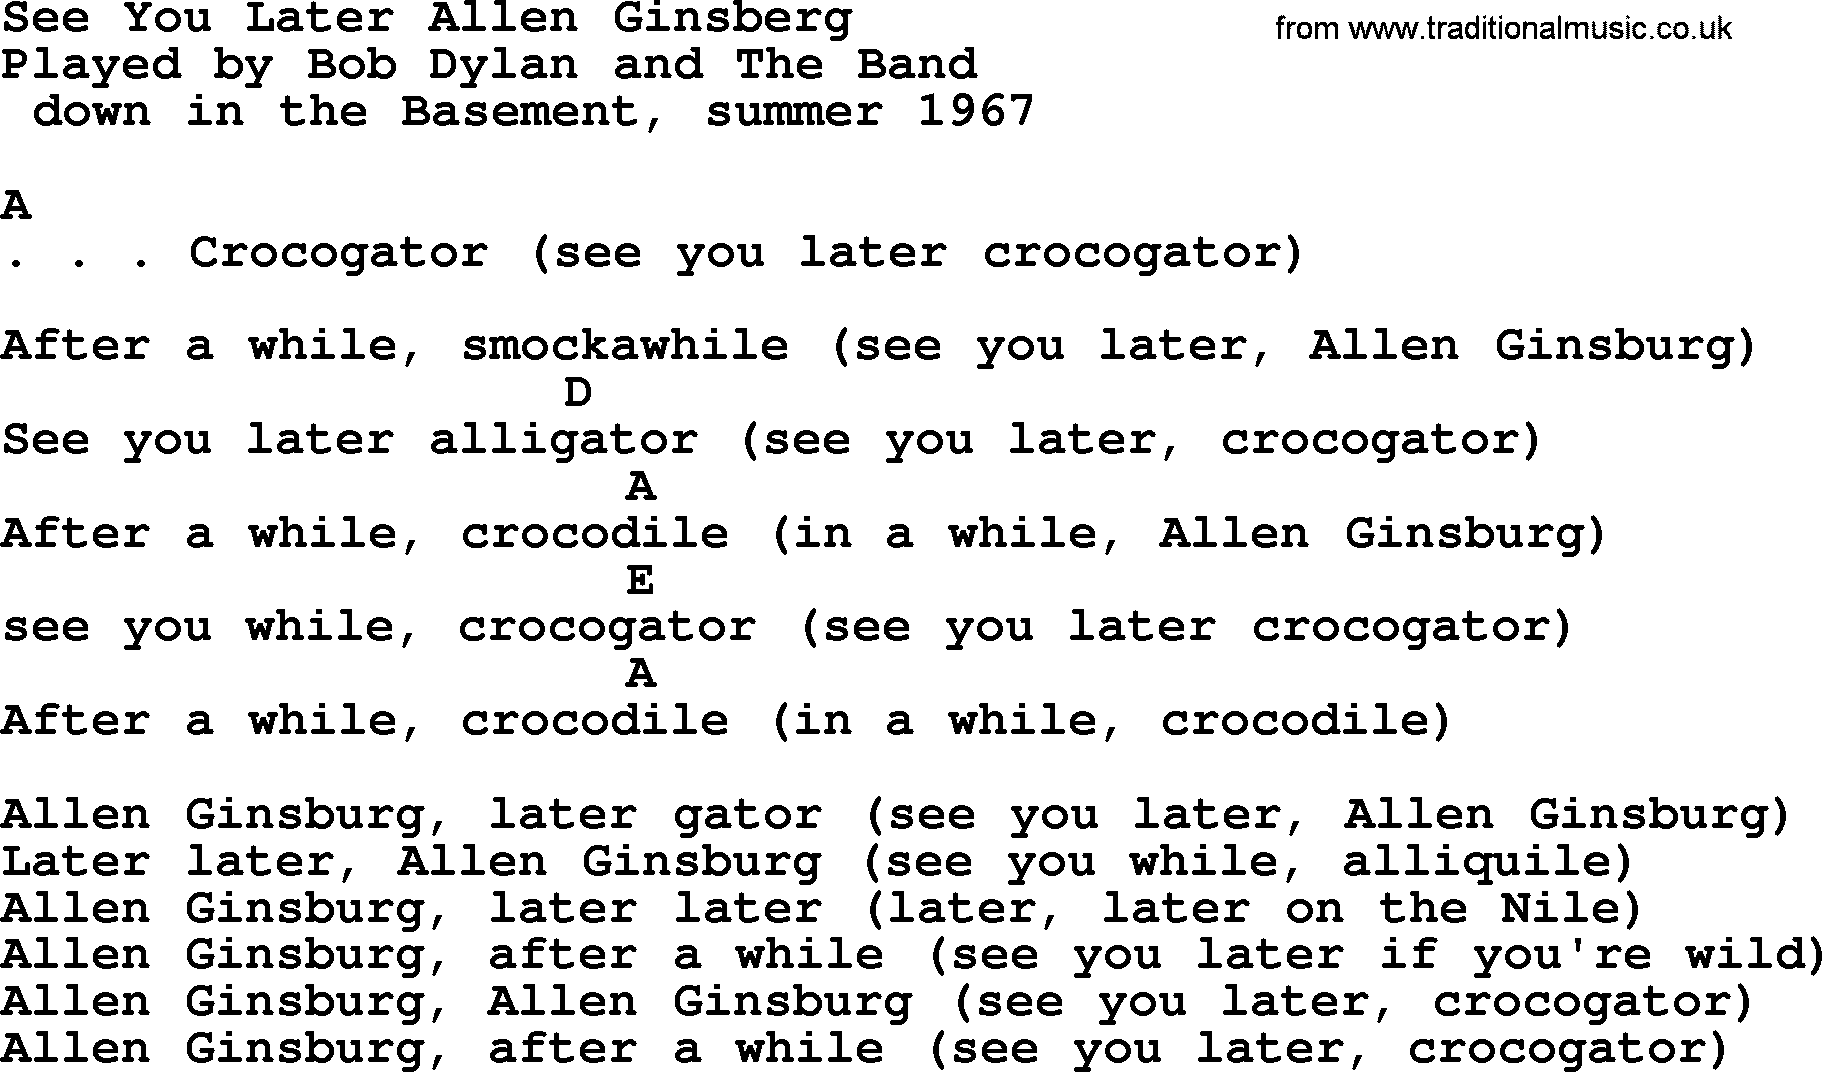 Bob Dylan song, lyrics with chords - See You Later Allen Ginsberg